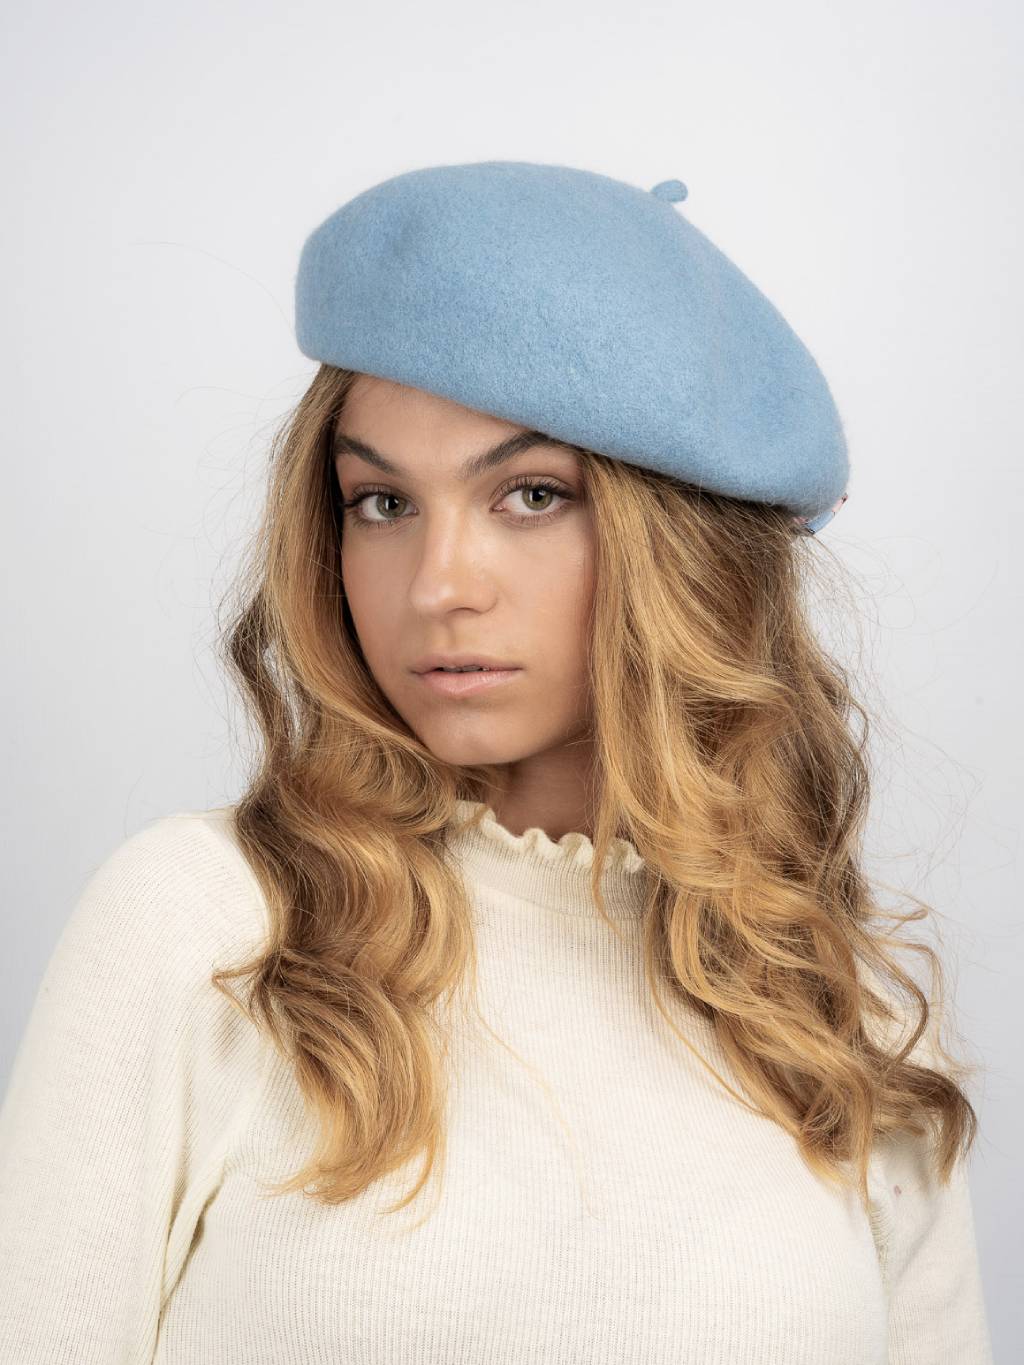 Polly Bow Back Beret - Periwinkle Blue - The Pretty Hat